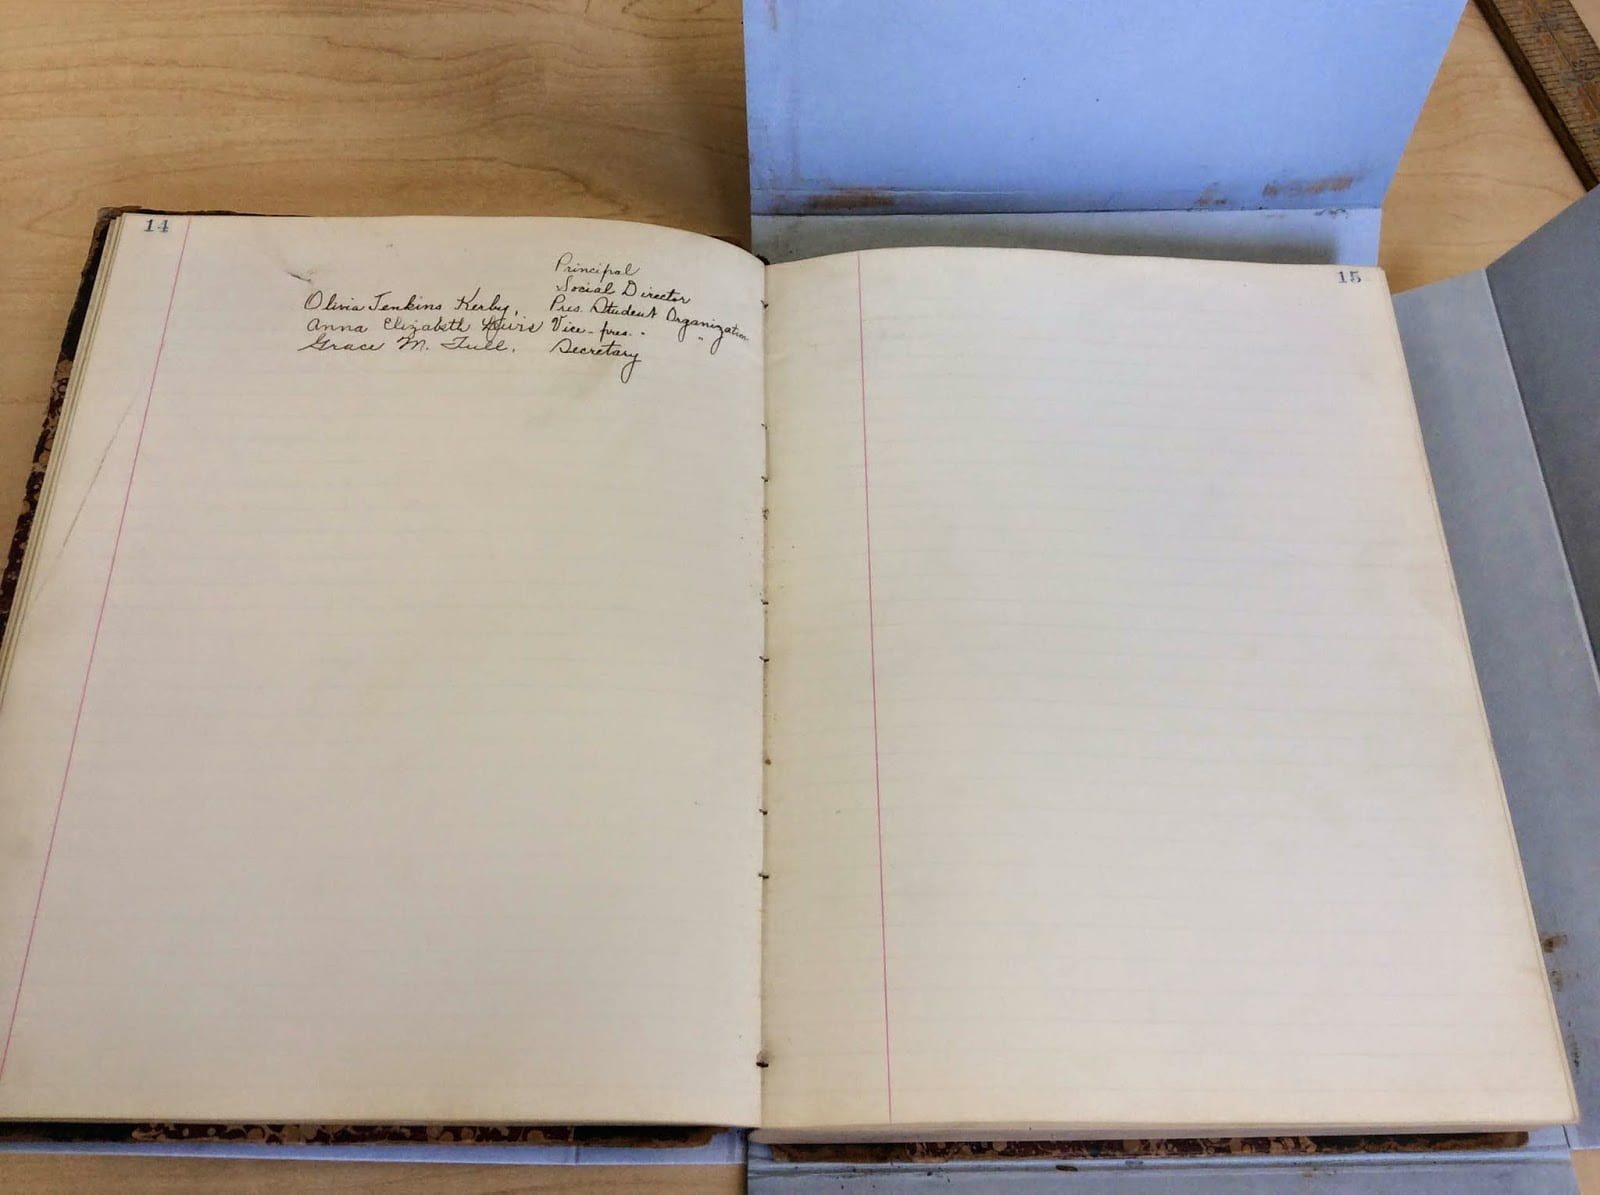 The first SGA officers hand-wrote the original 1921 agreement with faculty, constitution and by-laws in a book. The book is kept in a protective box to keep the binding from crumbling. 